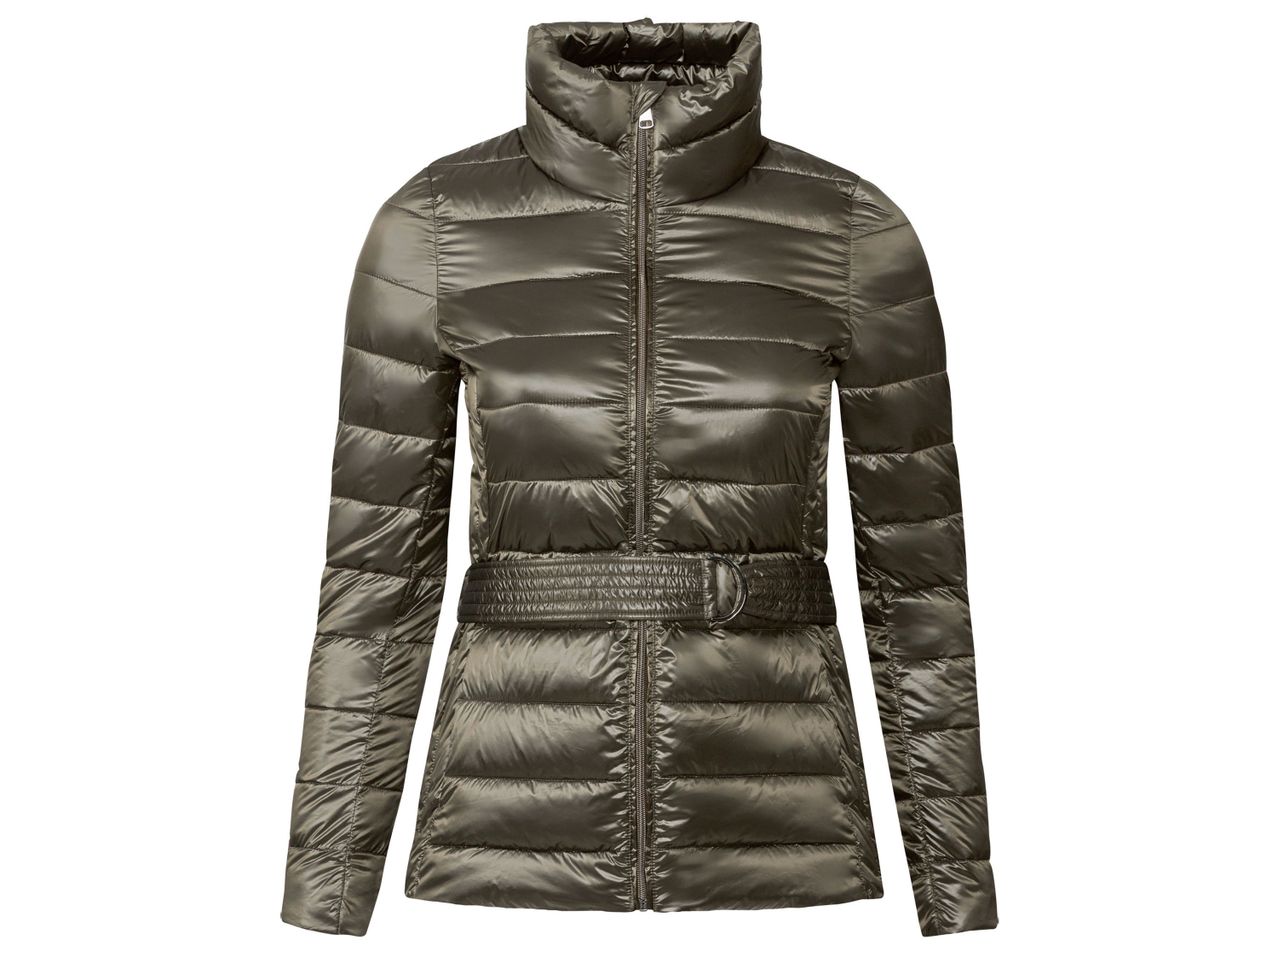 Go to full screen view: Ladies’ Lightweight Belted Jacket - Image 2